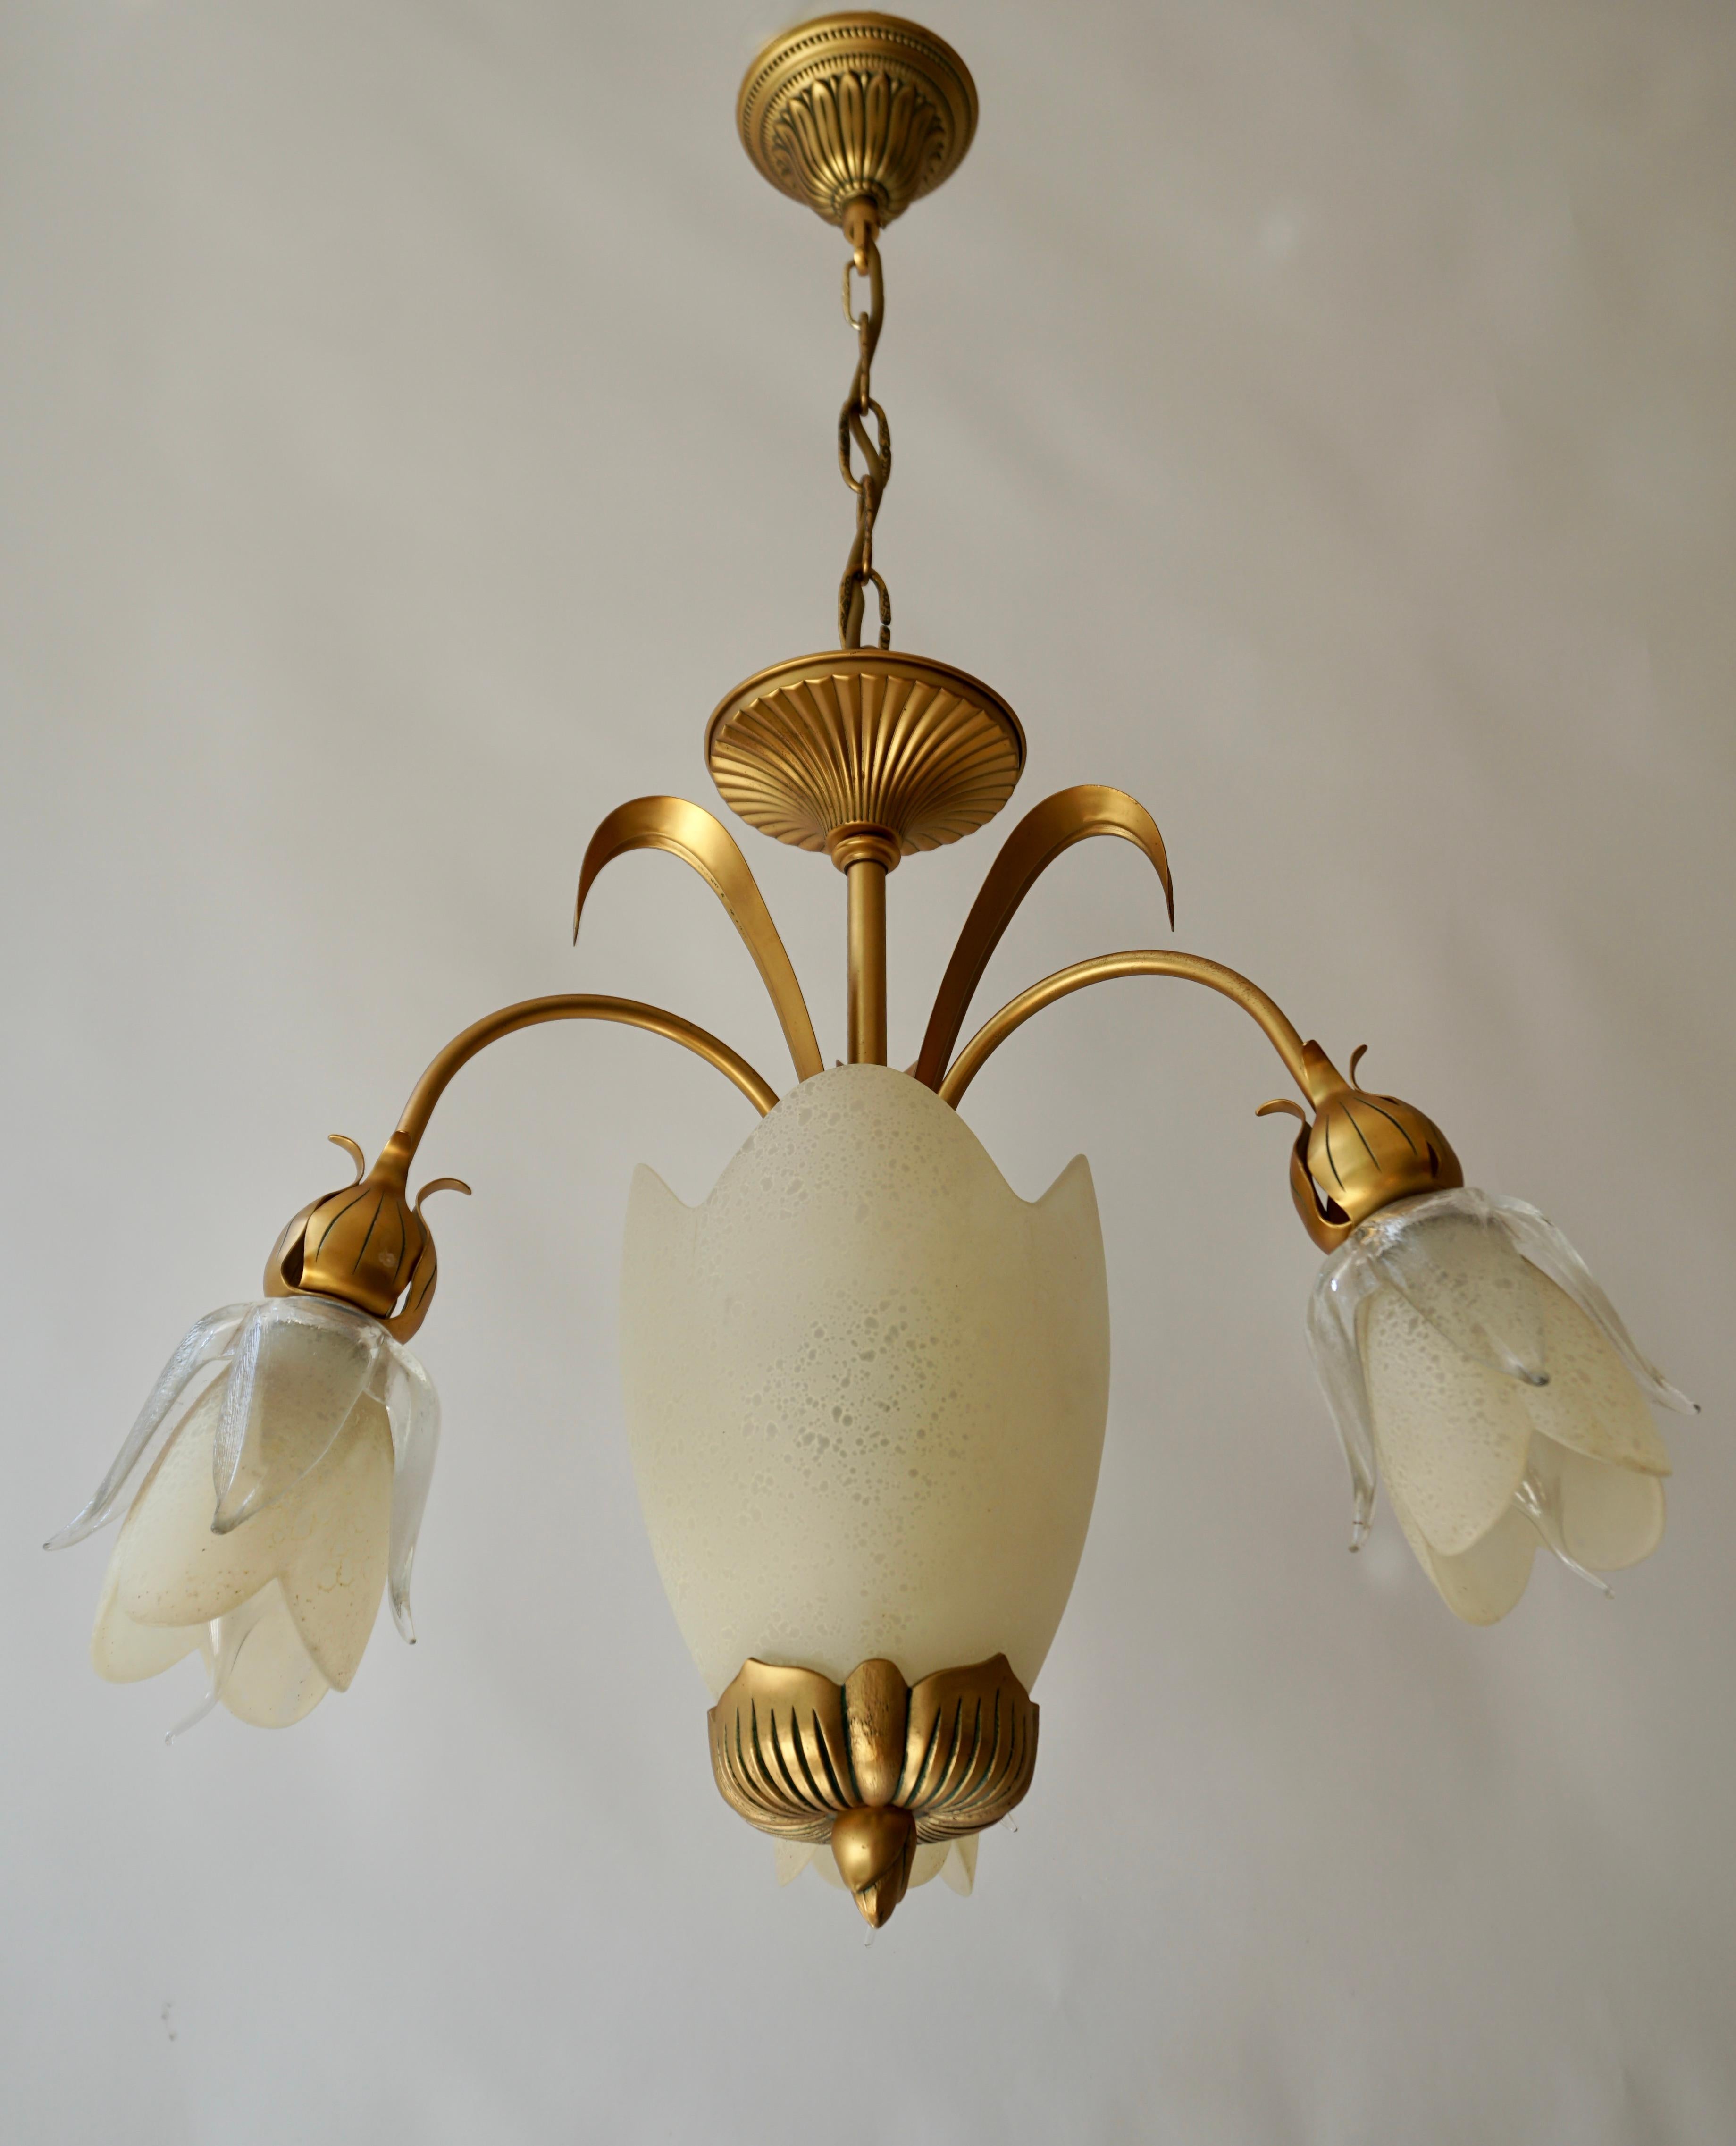 Italian Murano glass and brass palm tree leaves chandelier with beautiful tulip-shaped glass shades.

Diameter 20.8